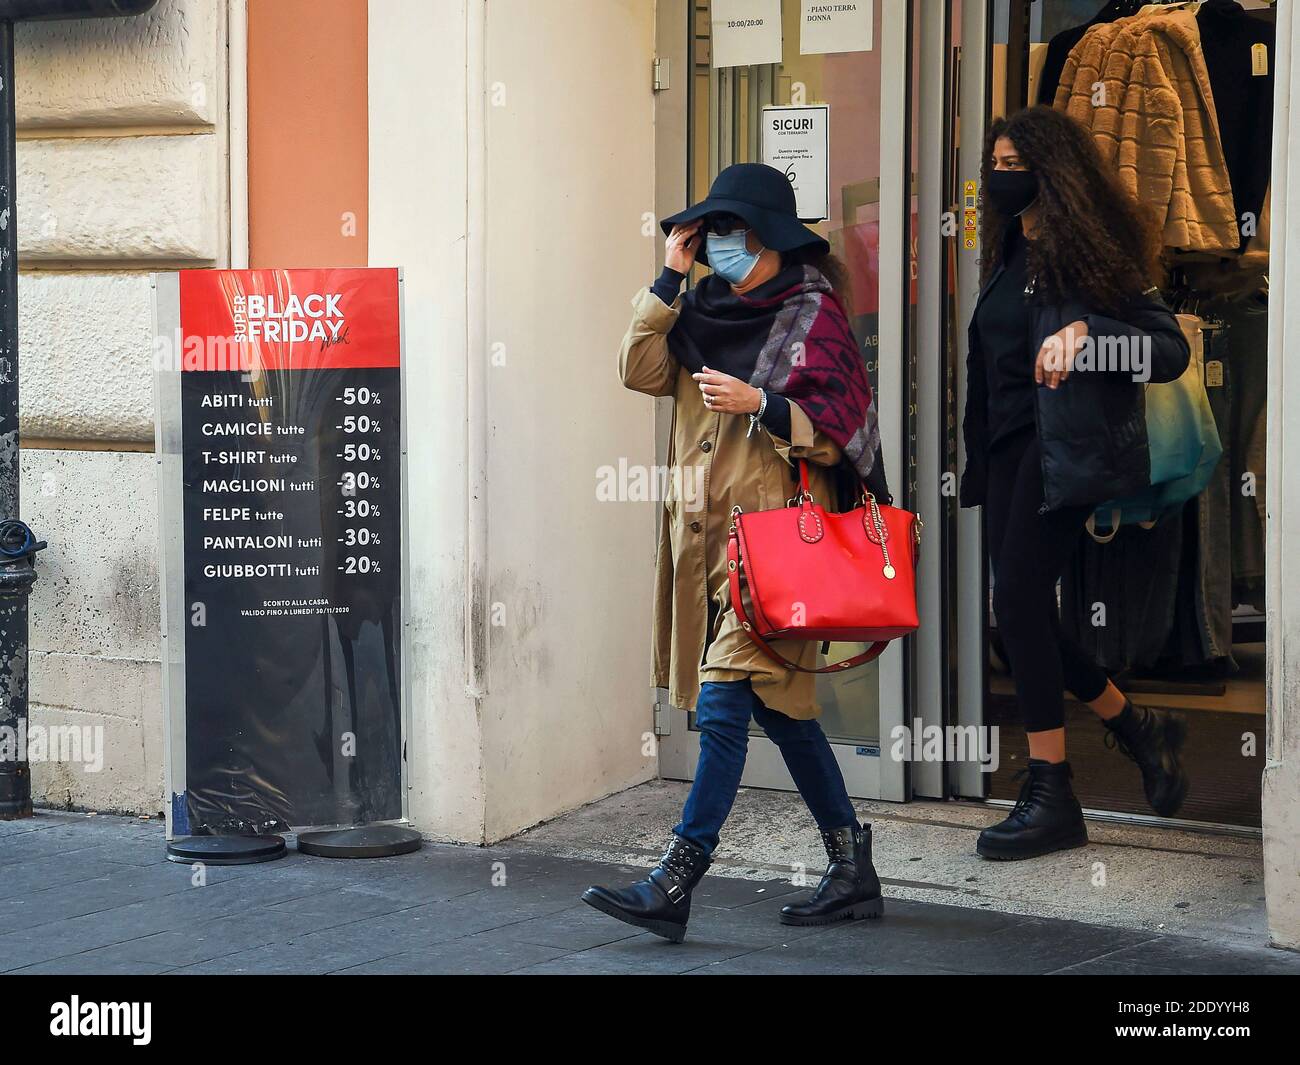 Italy, Rome, November 27th, 2020 : People goes shopping on the Black Friday  weekend in the fashion district of Rome. Photo © Fabio  Mazzarella/Sintesi/Alamy Live News Stock Photo - Alamy